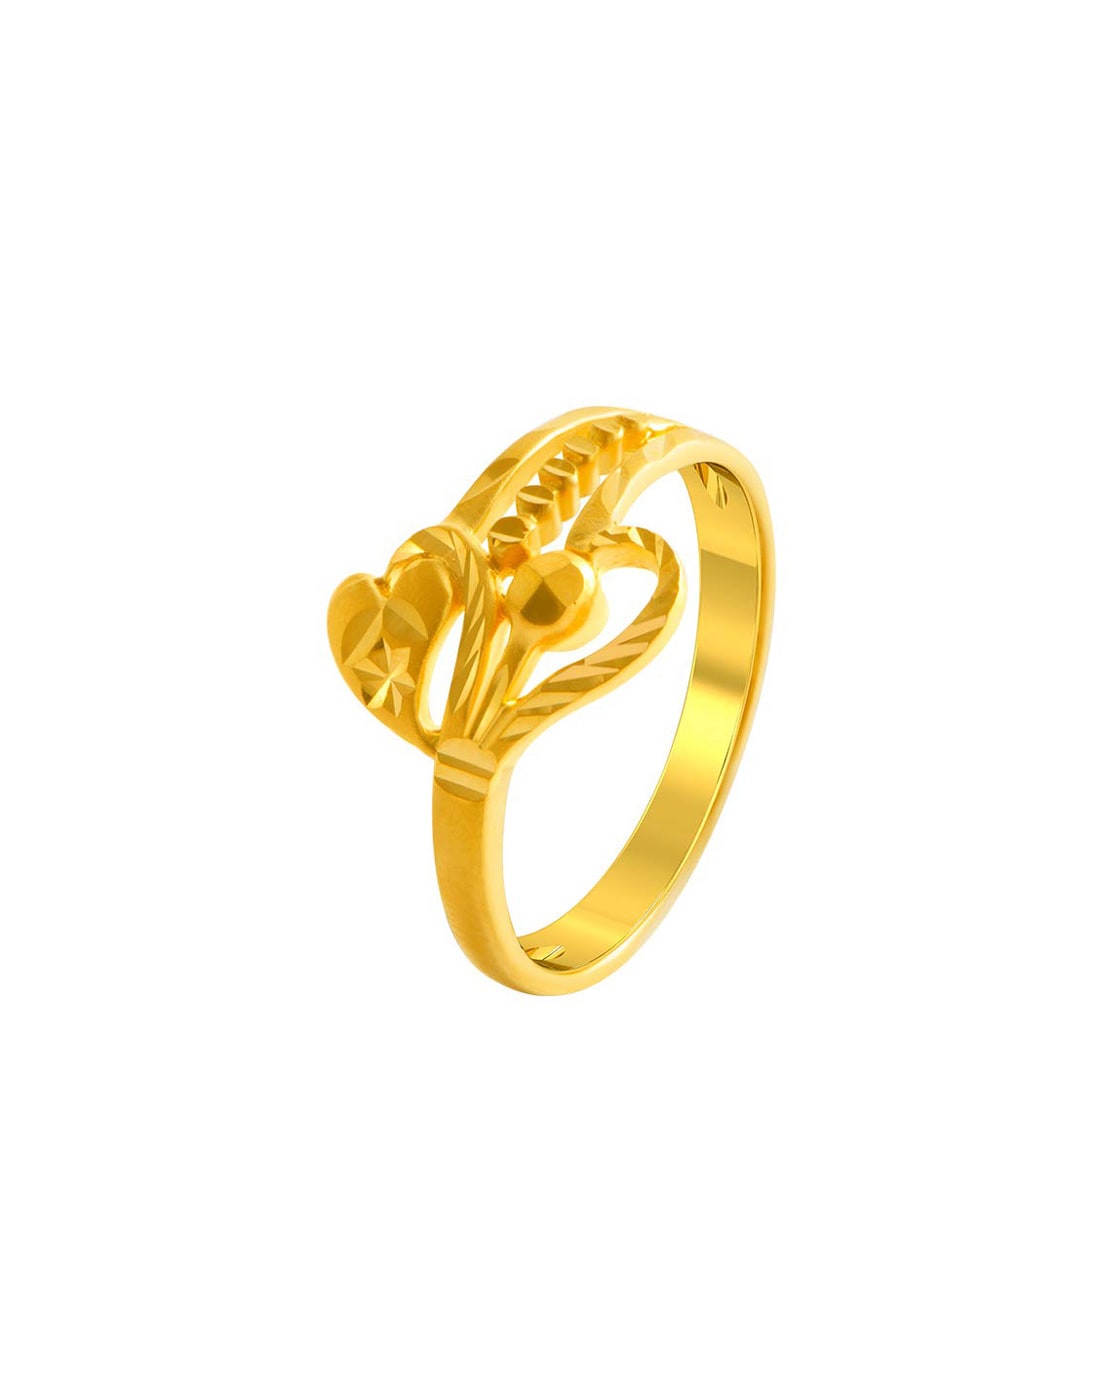 Gold Rings for Women | PC Chandra Jewellers